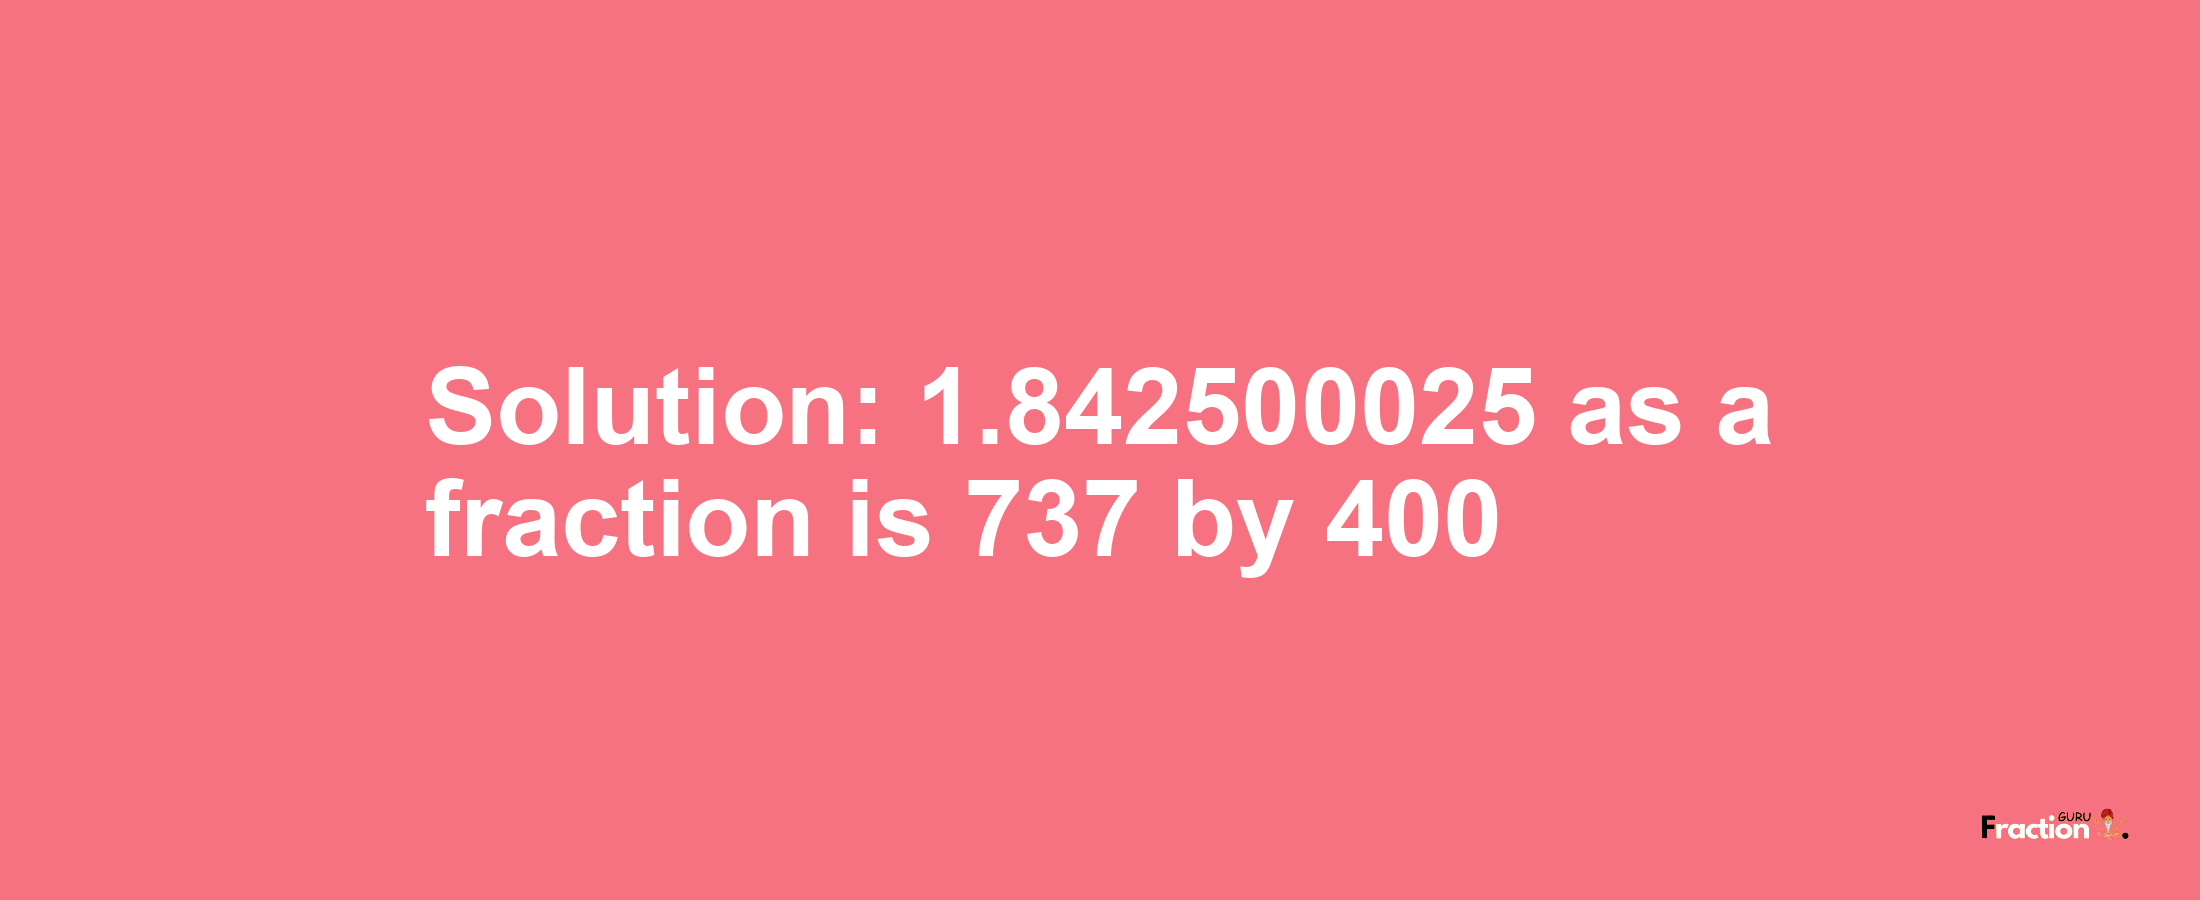 Solution:1.842500025 as a fraction is 737/400